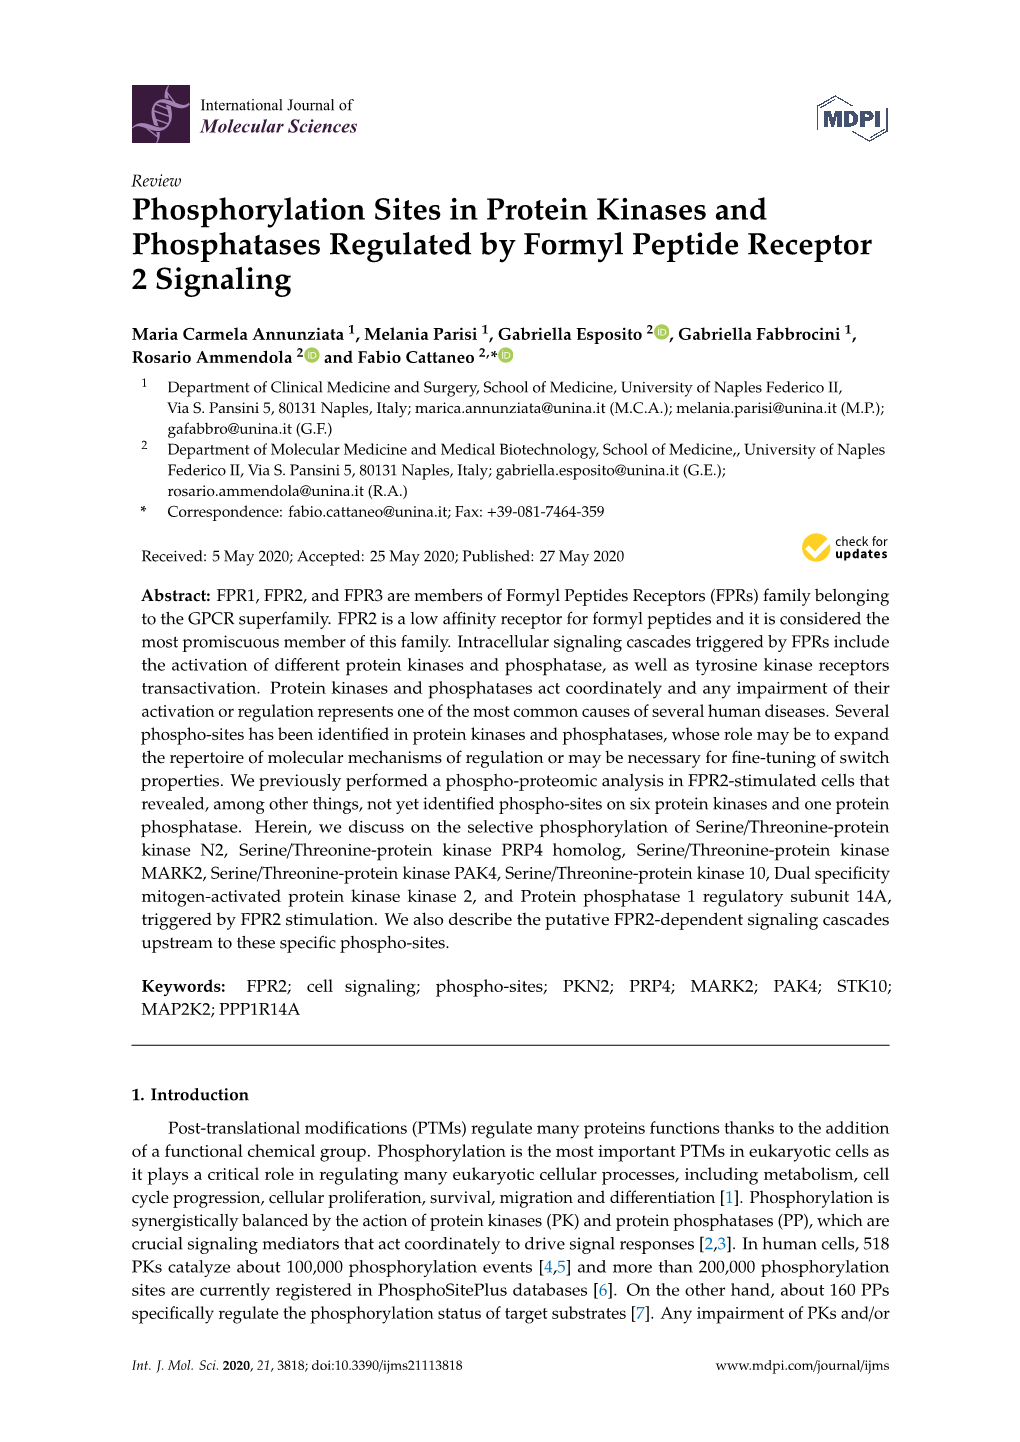 Phosphorylation Sites in Protein Kinases and Phosphatases Regulated by Formyl Peptide Receptor 2 Signaling